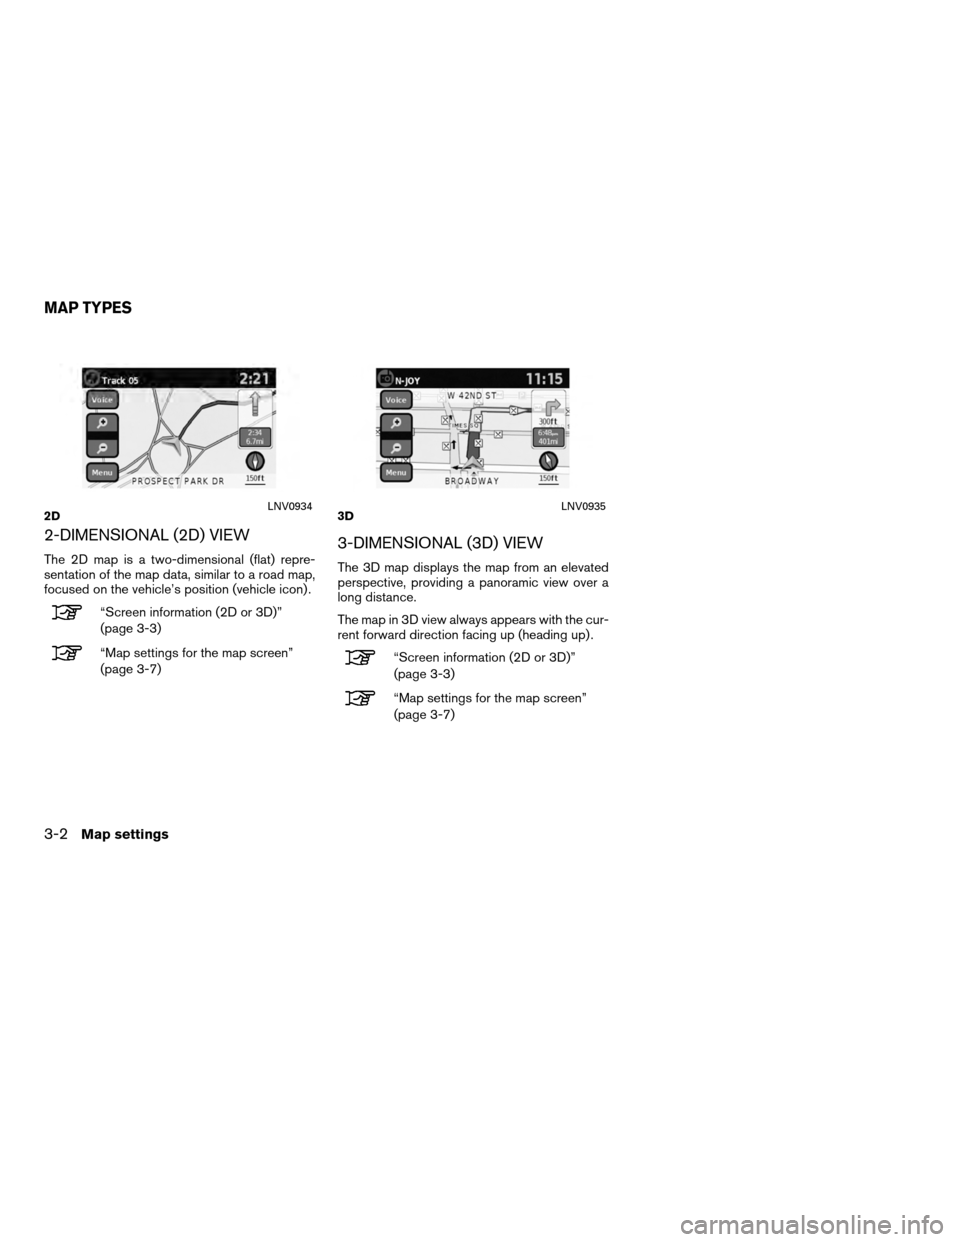 NISSAN SENTRA 2010 B17 / 7.G LC Navigation Manual 2-DIMENSIONAL (2D) VIEW
The 2D map is a two-dimensional (flat) repre-
sentation of the map data, similar to a road map,
focused on the vehicle’s position (vehicle icon) .
“Screen information (2D o